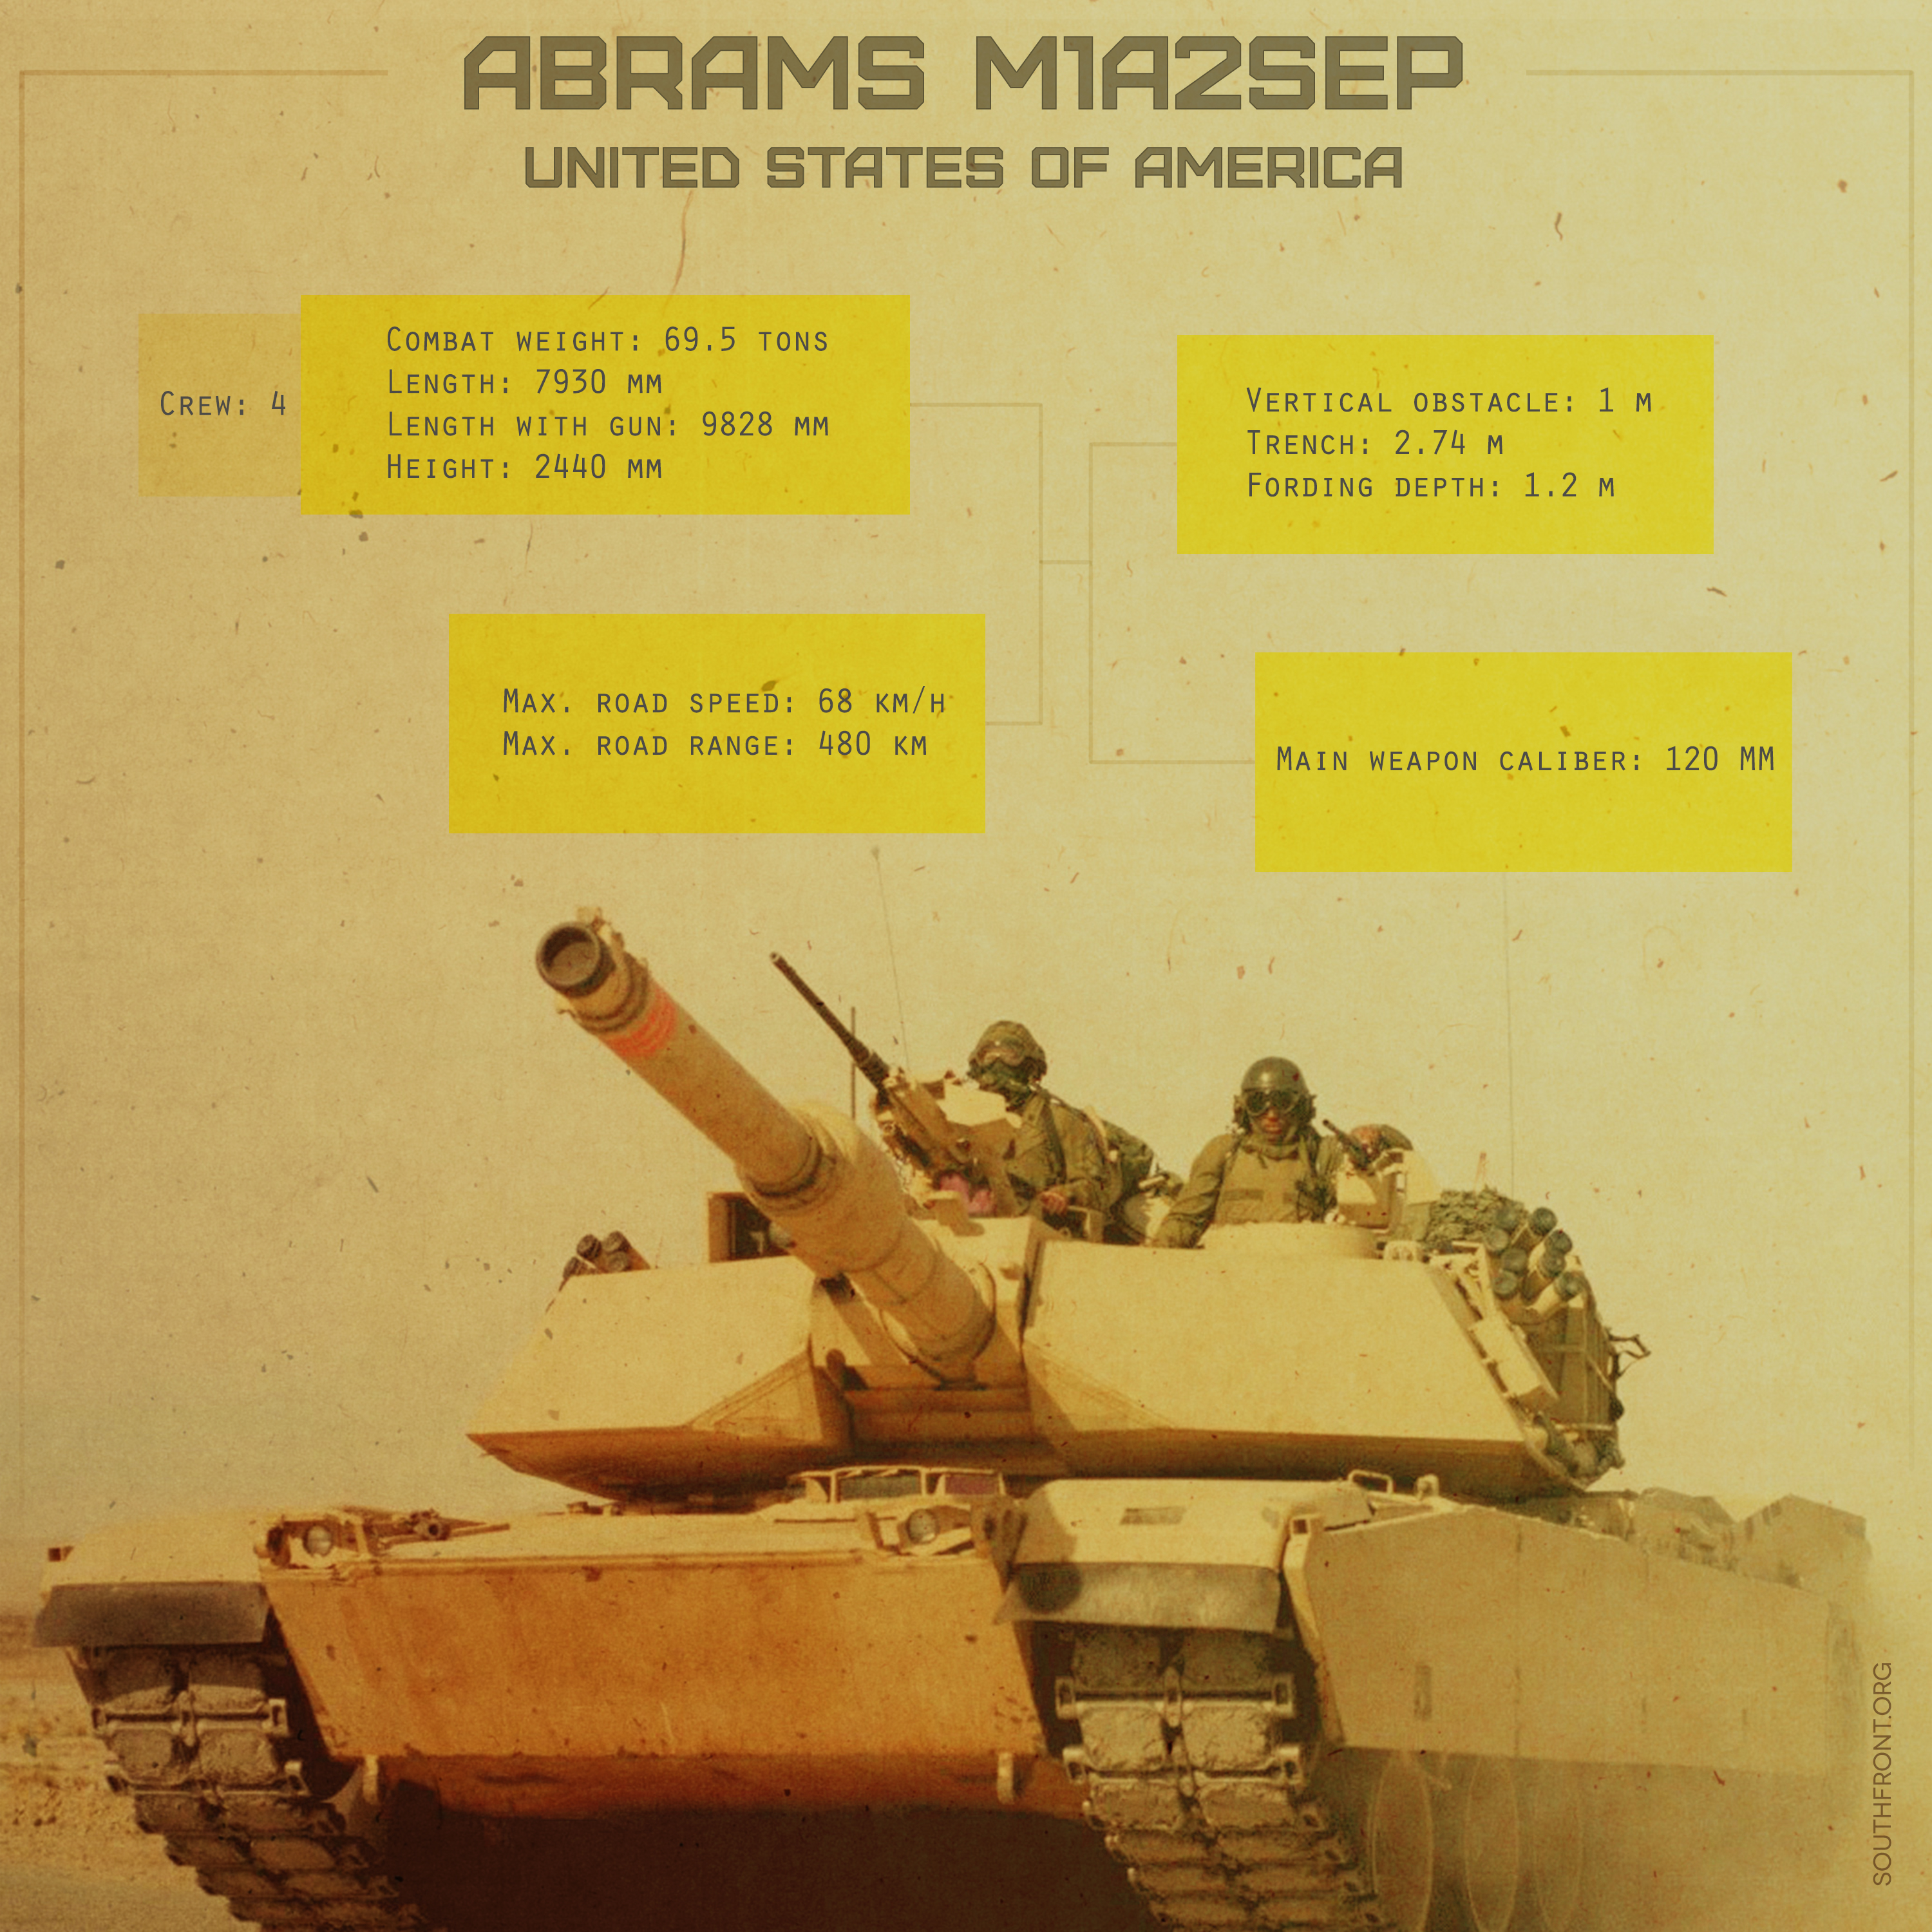 ISIS Blows Up Abrams Main Battle Tank near Mosul (Video & Infographics)